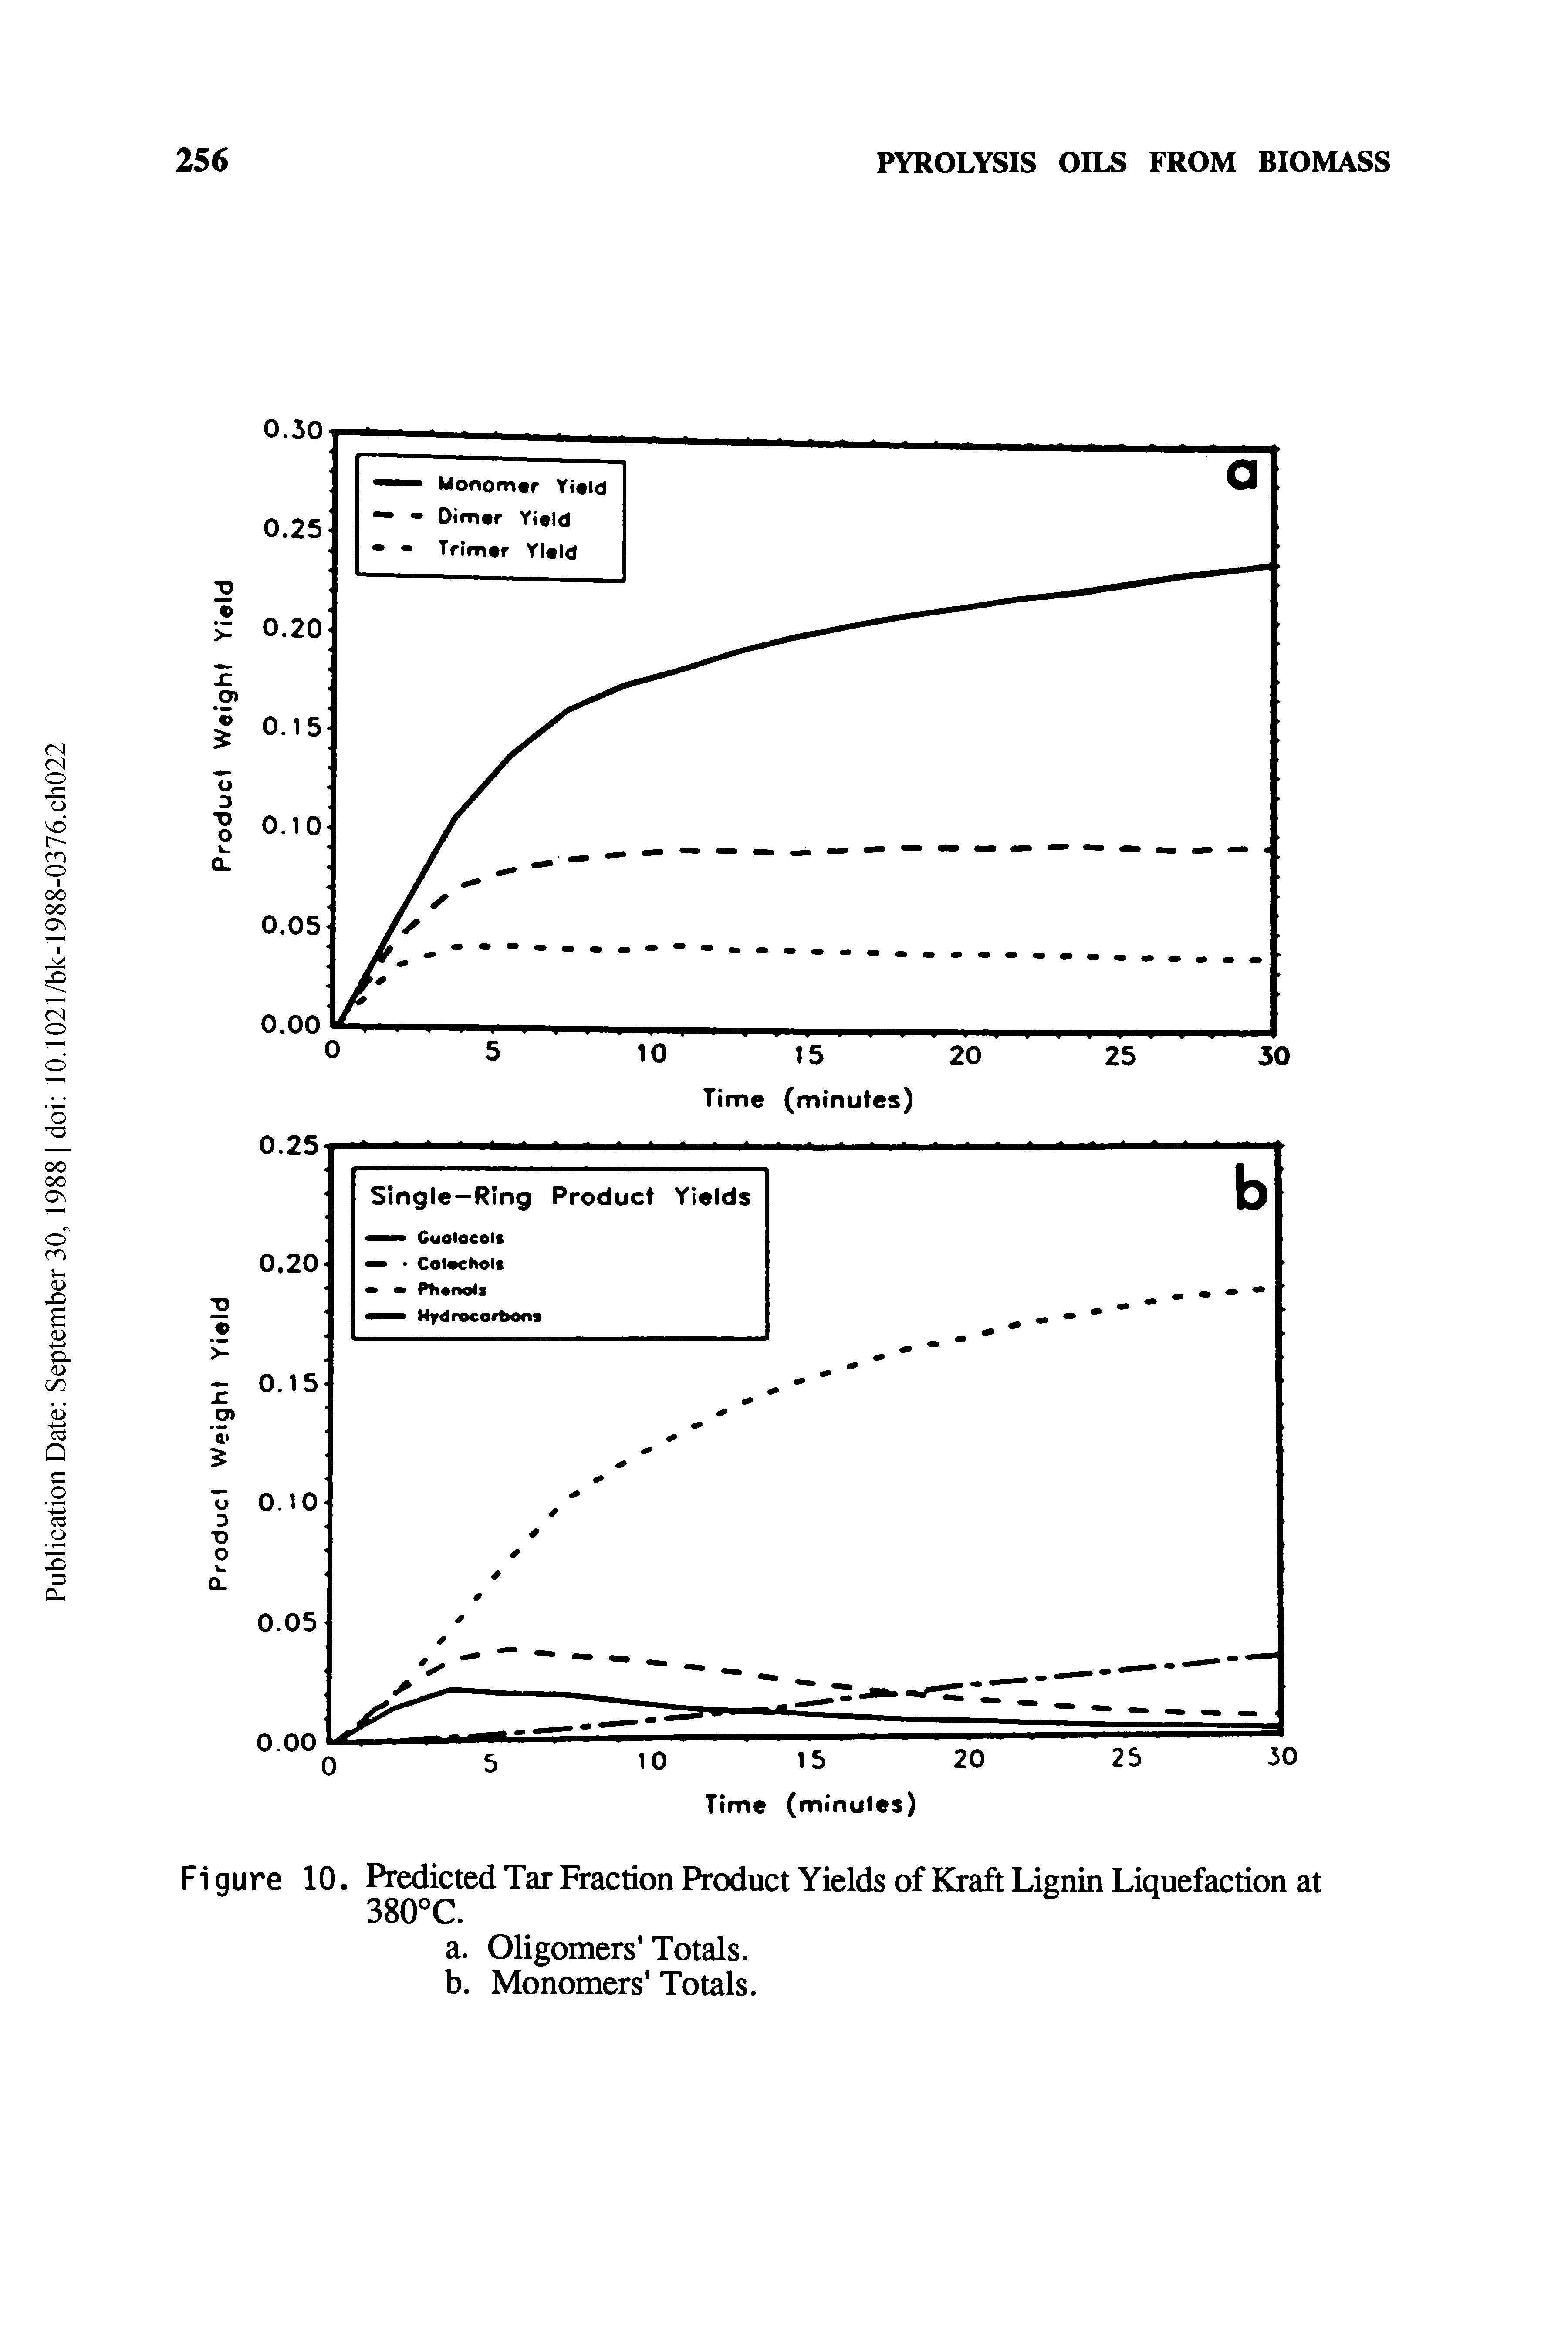 Figure 10. Predicted Tar Fraction Product Yields of Kraft Lignin Liquefaction at 380°C.